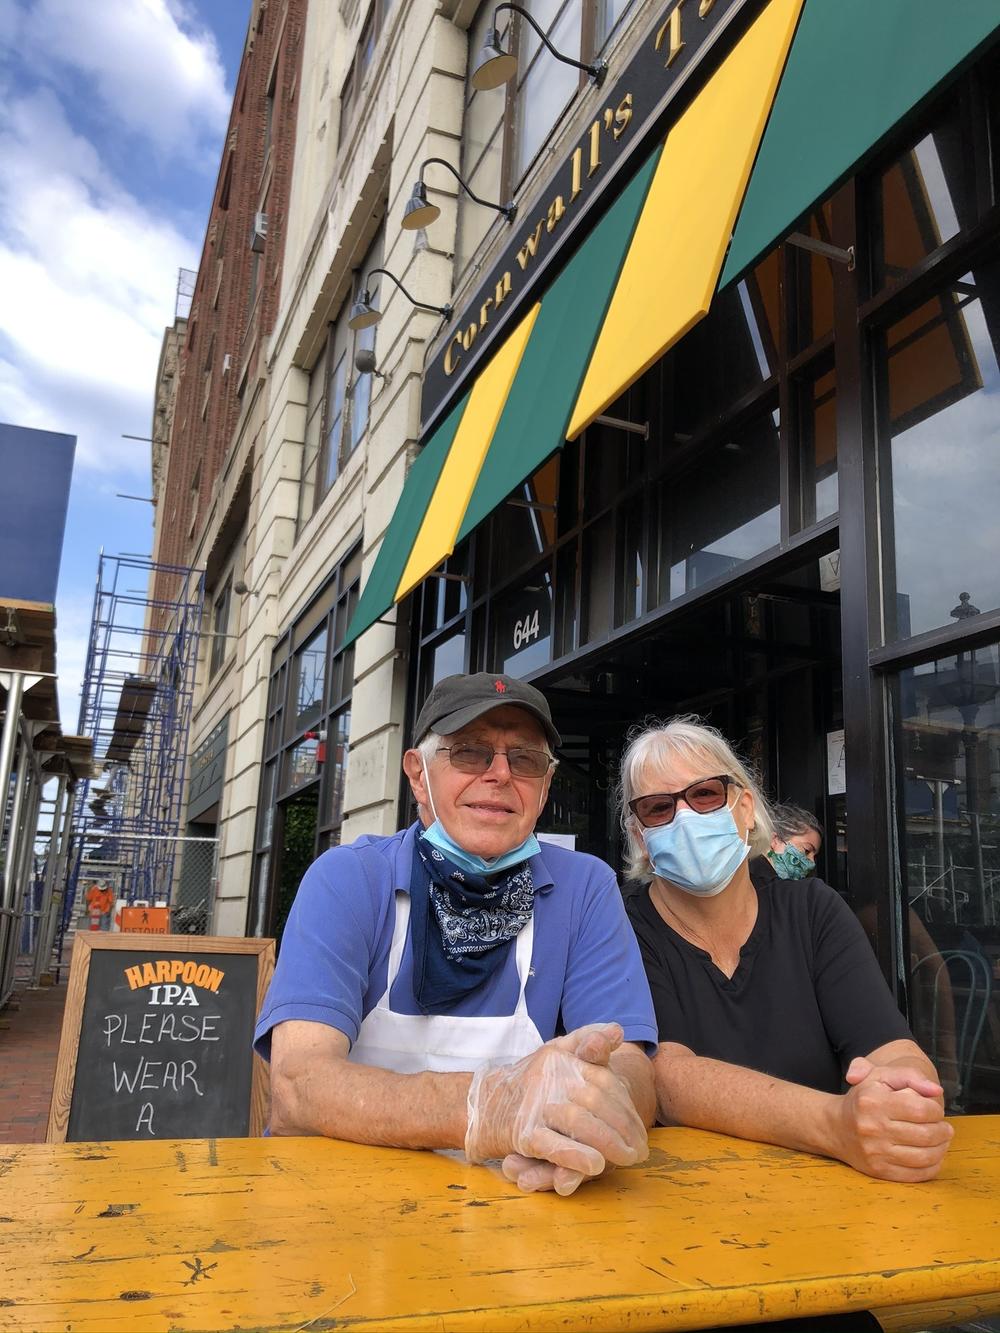 Pam and John Beale set up new sidewalk seating in front of Cornwall's, hoping the extra capacity would help them survive the pandemic. Their English-style pub has been a mainstay in Boston's Kenmore Square for nearly 40 years.